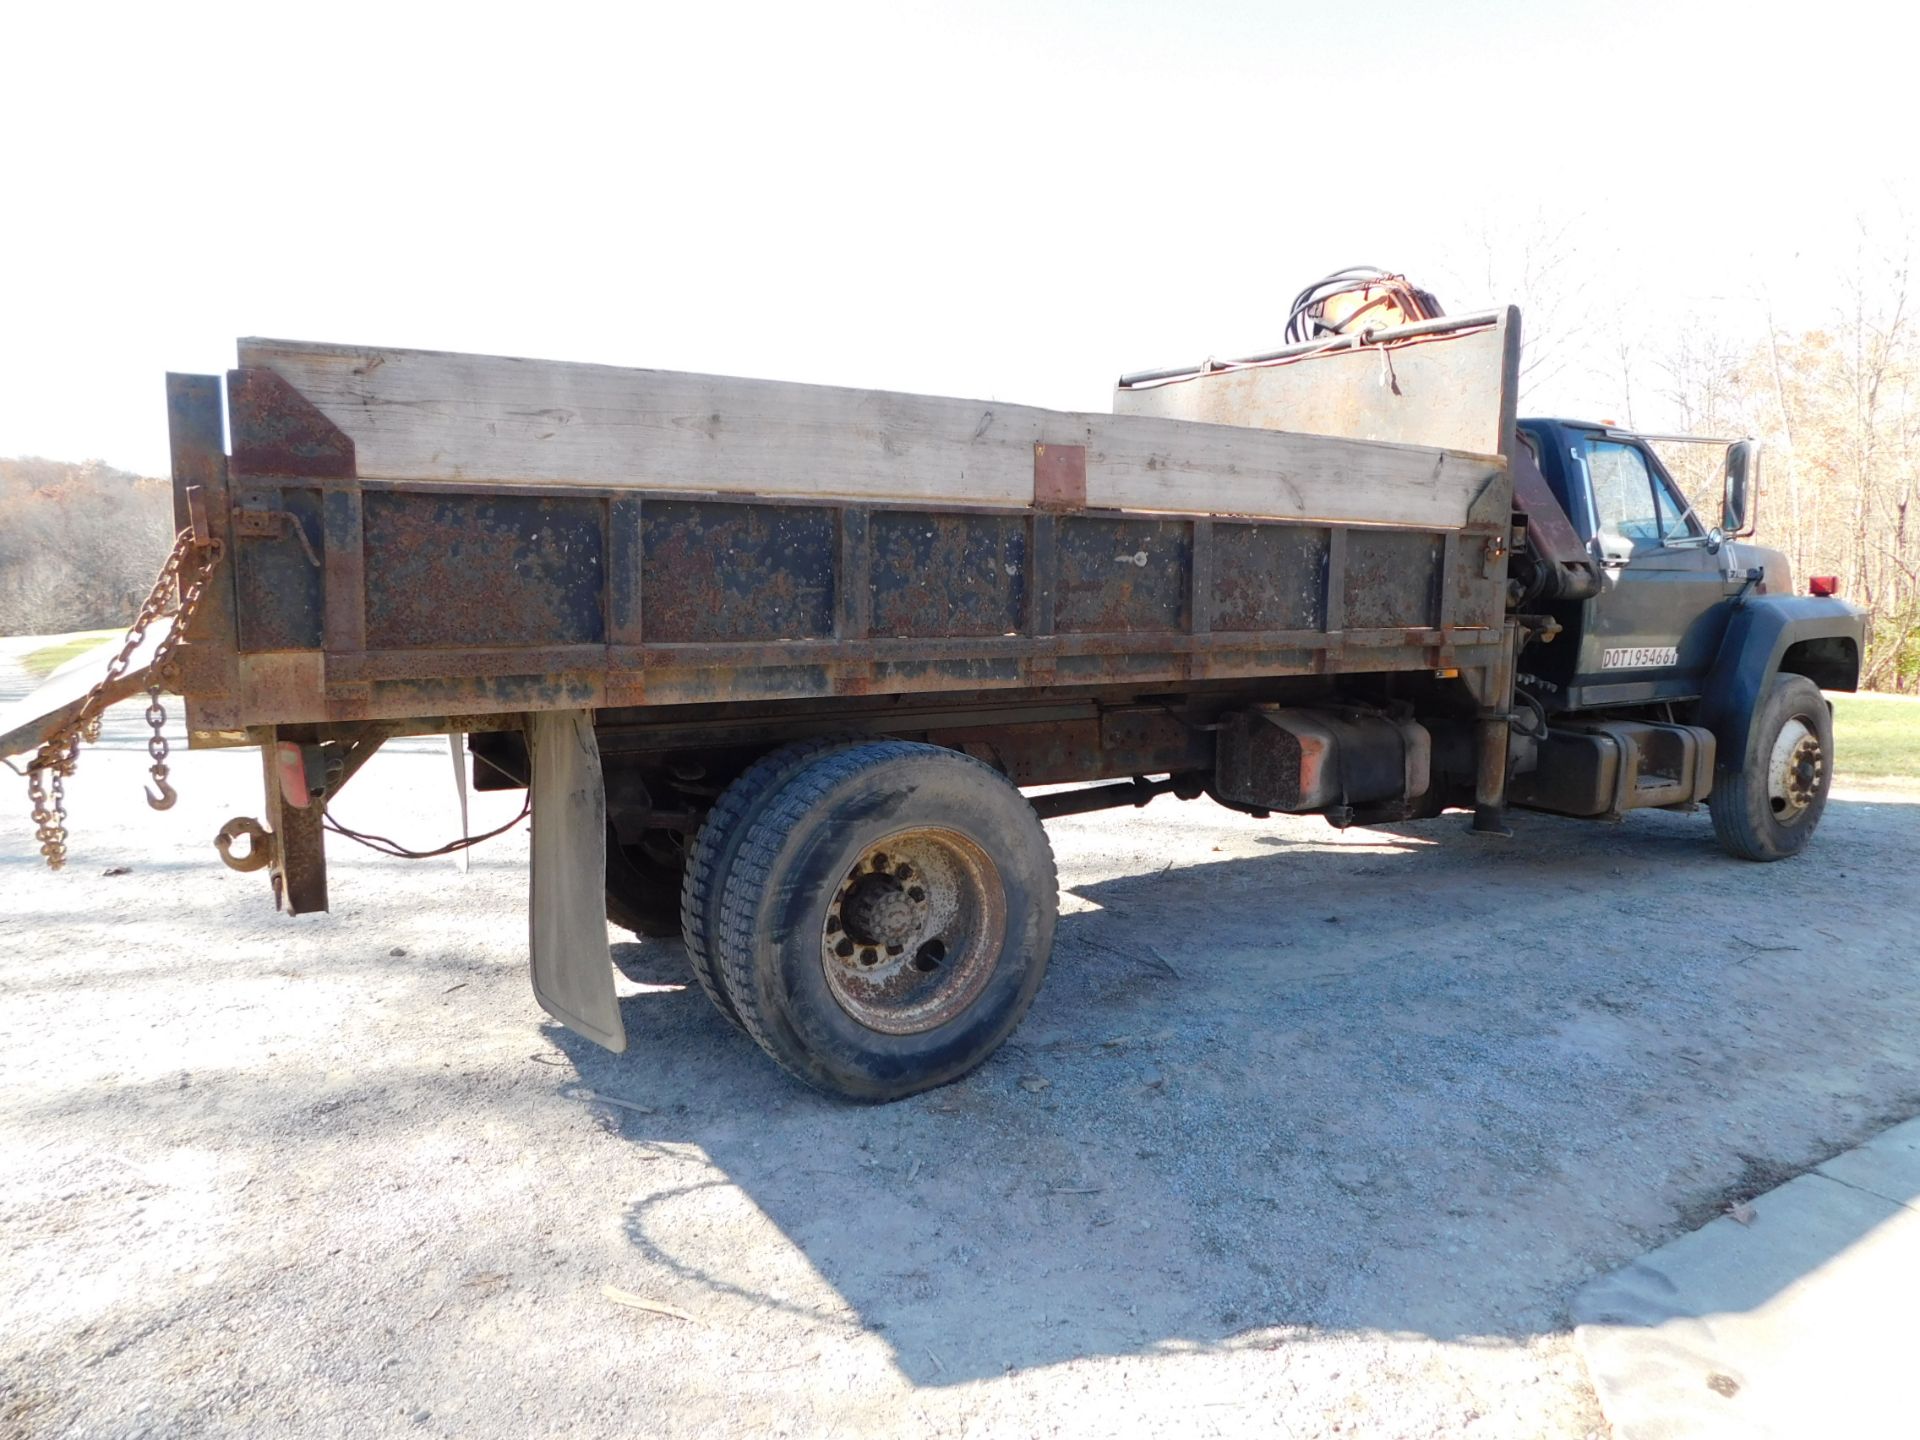 1993 Ford F700 Single Axle Boom Lift Truck, VIN 1FDNK74C0PVA27527, 5-Speed Manual Trasnsmission, - Image 7 of 33